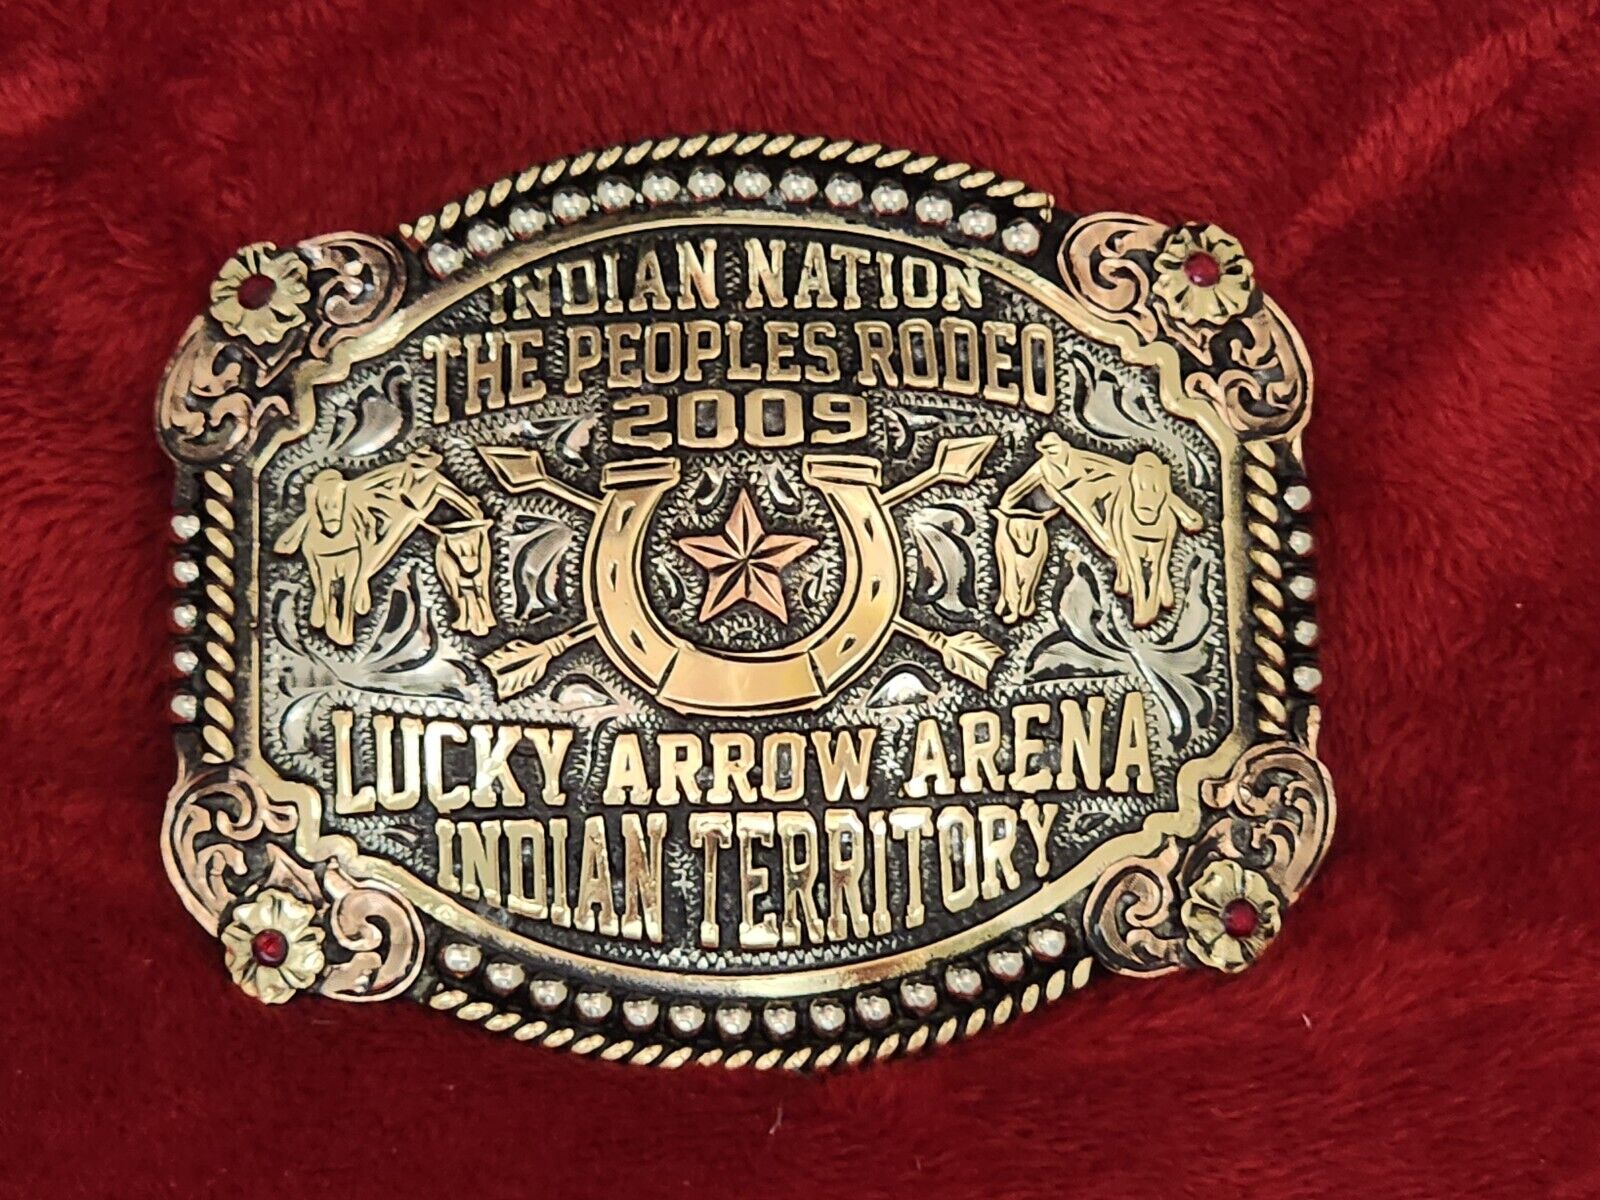 BULLDOGGING PROFESSIONAL RODEO☆INDIAN NATION☆ CHAMPION TROPHY BUCKLE☆2009☆192